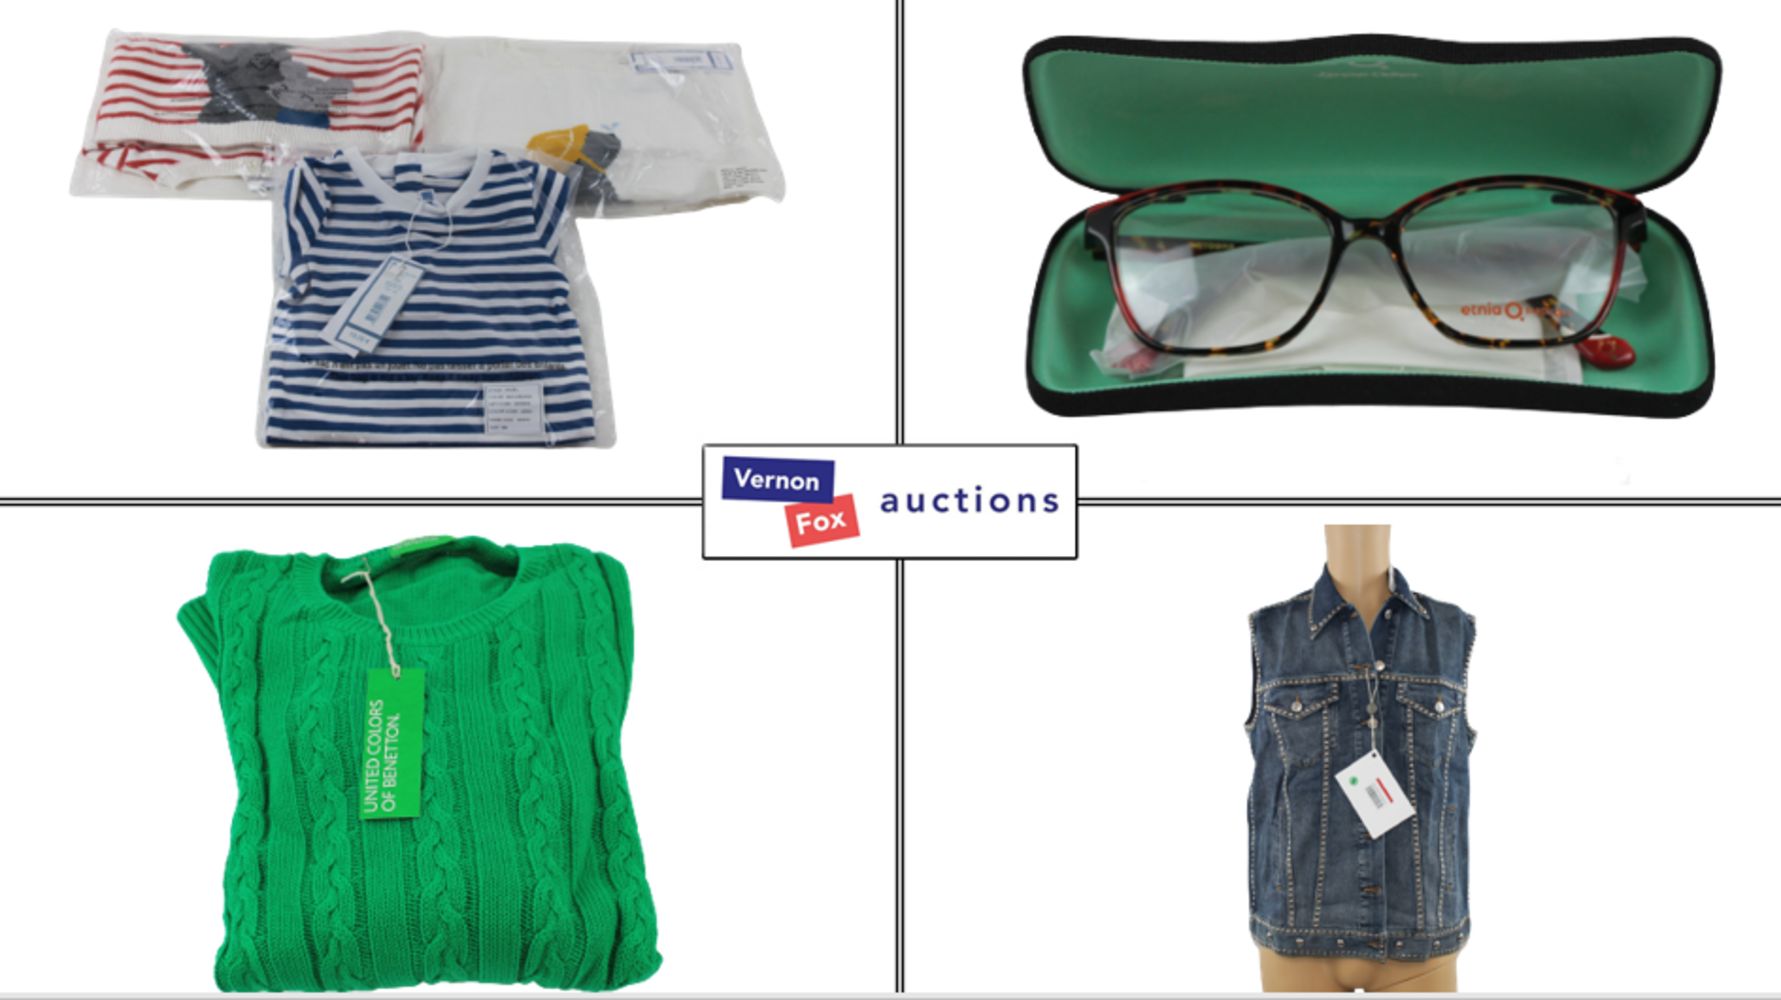 TIMED ONLINE AUCTION: A wide choice of Clothing, Glasses, Auto Parts and Industrial Items. FREE UK DELIVERY!